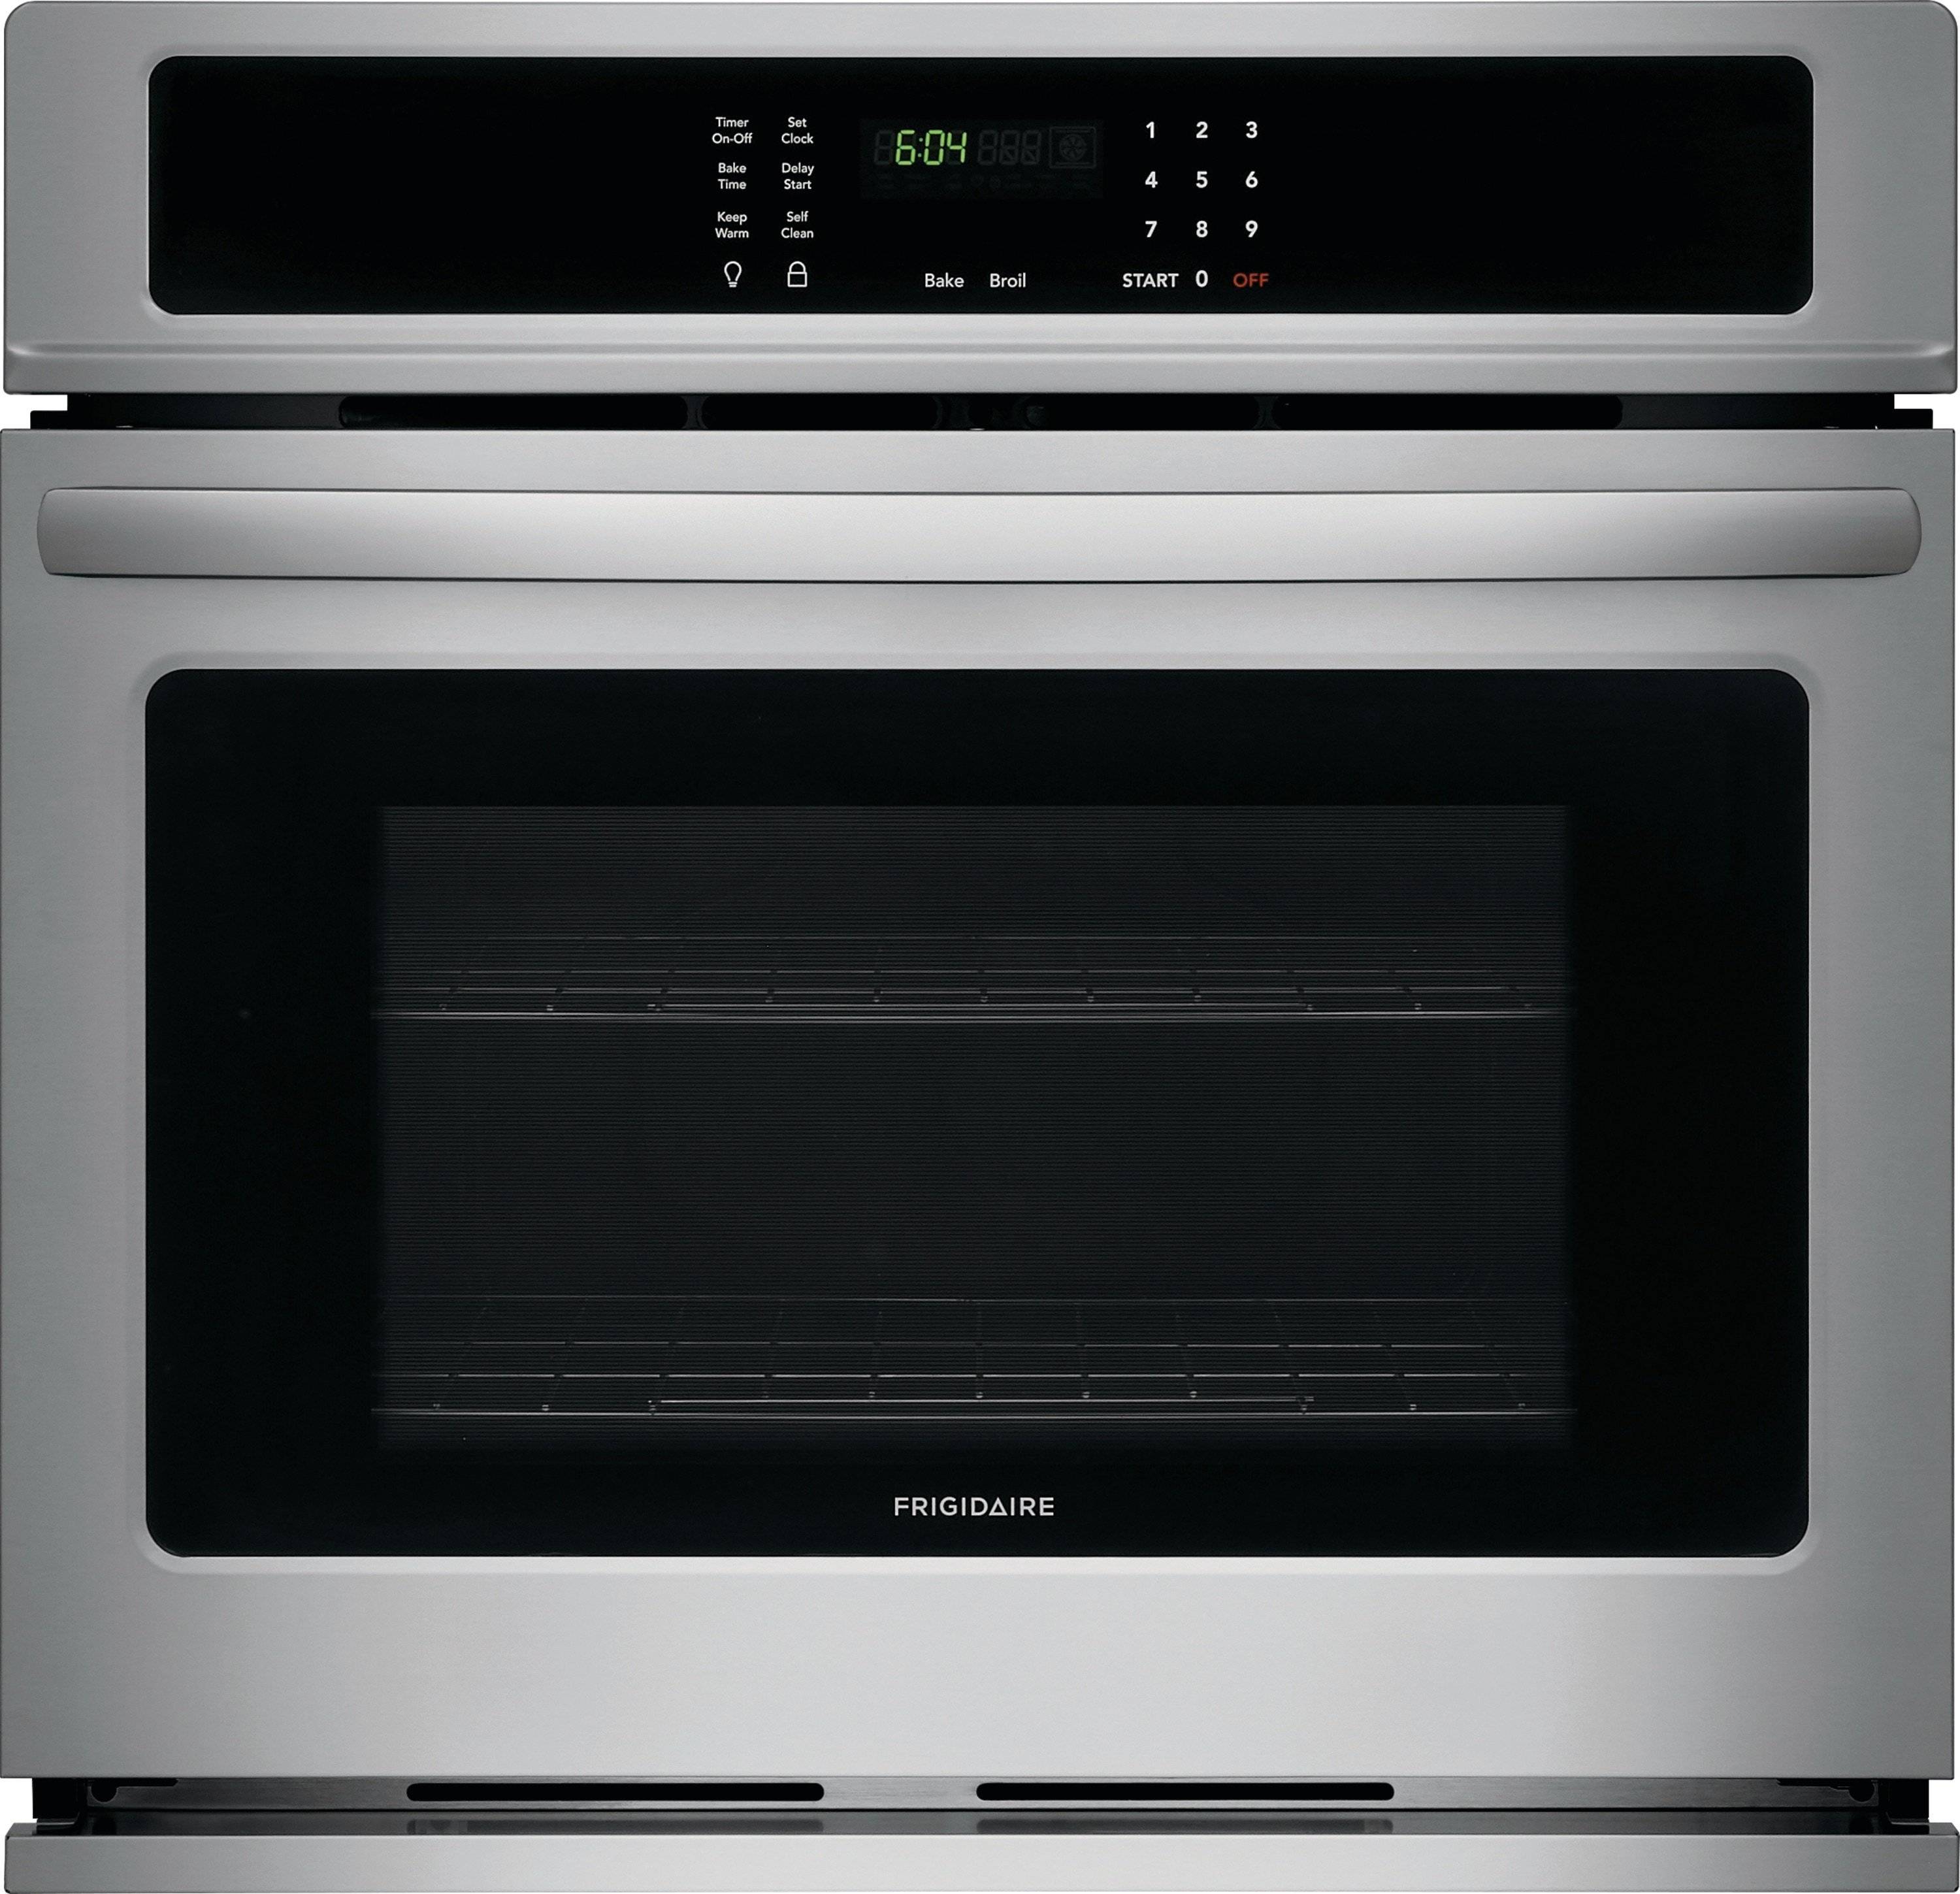 Frigidaire 30" Single Electric Wall Oven (Stainless Steel)